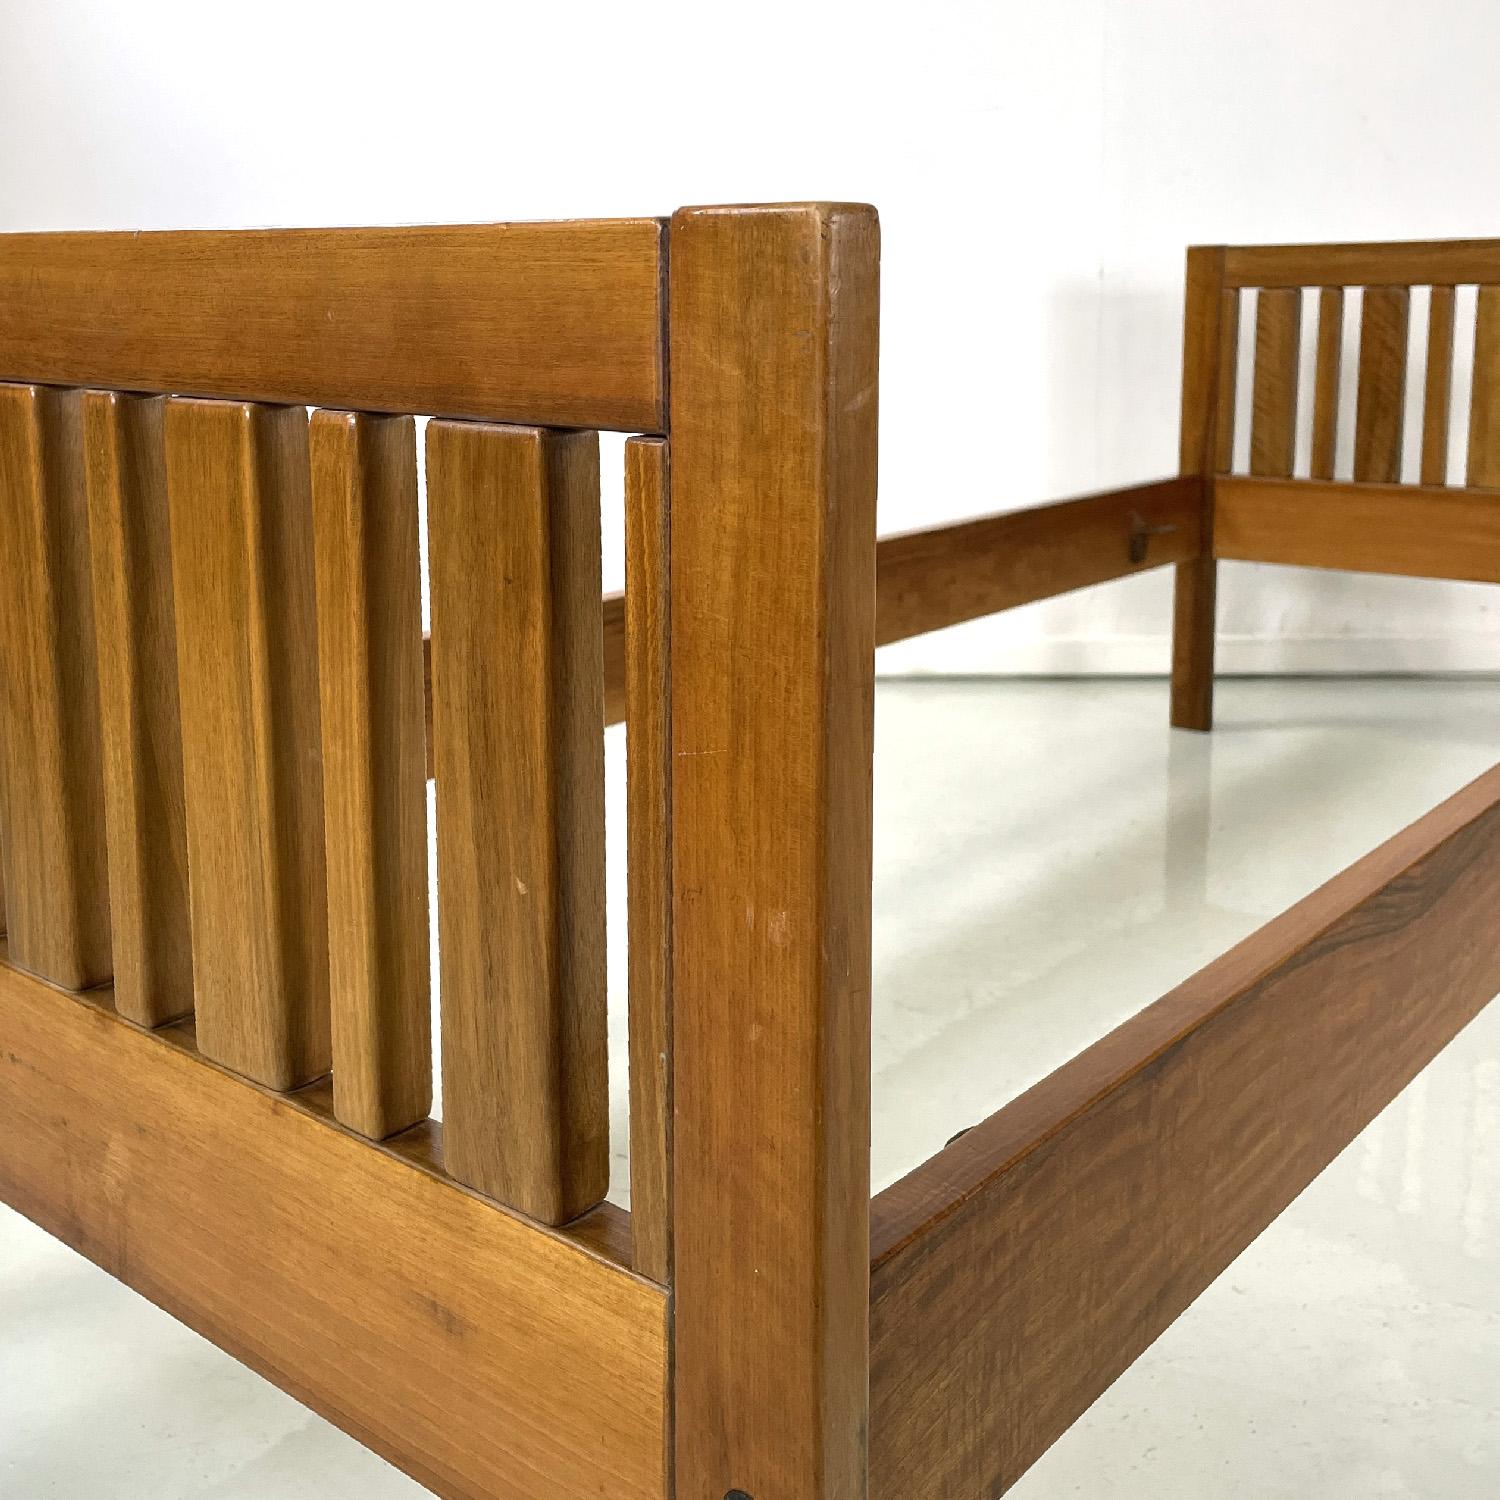 Italian mid-century modern bed by Ettore Sottsass for Poltronova, 1960s For Sale 6